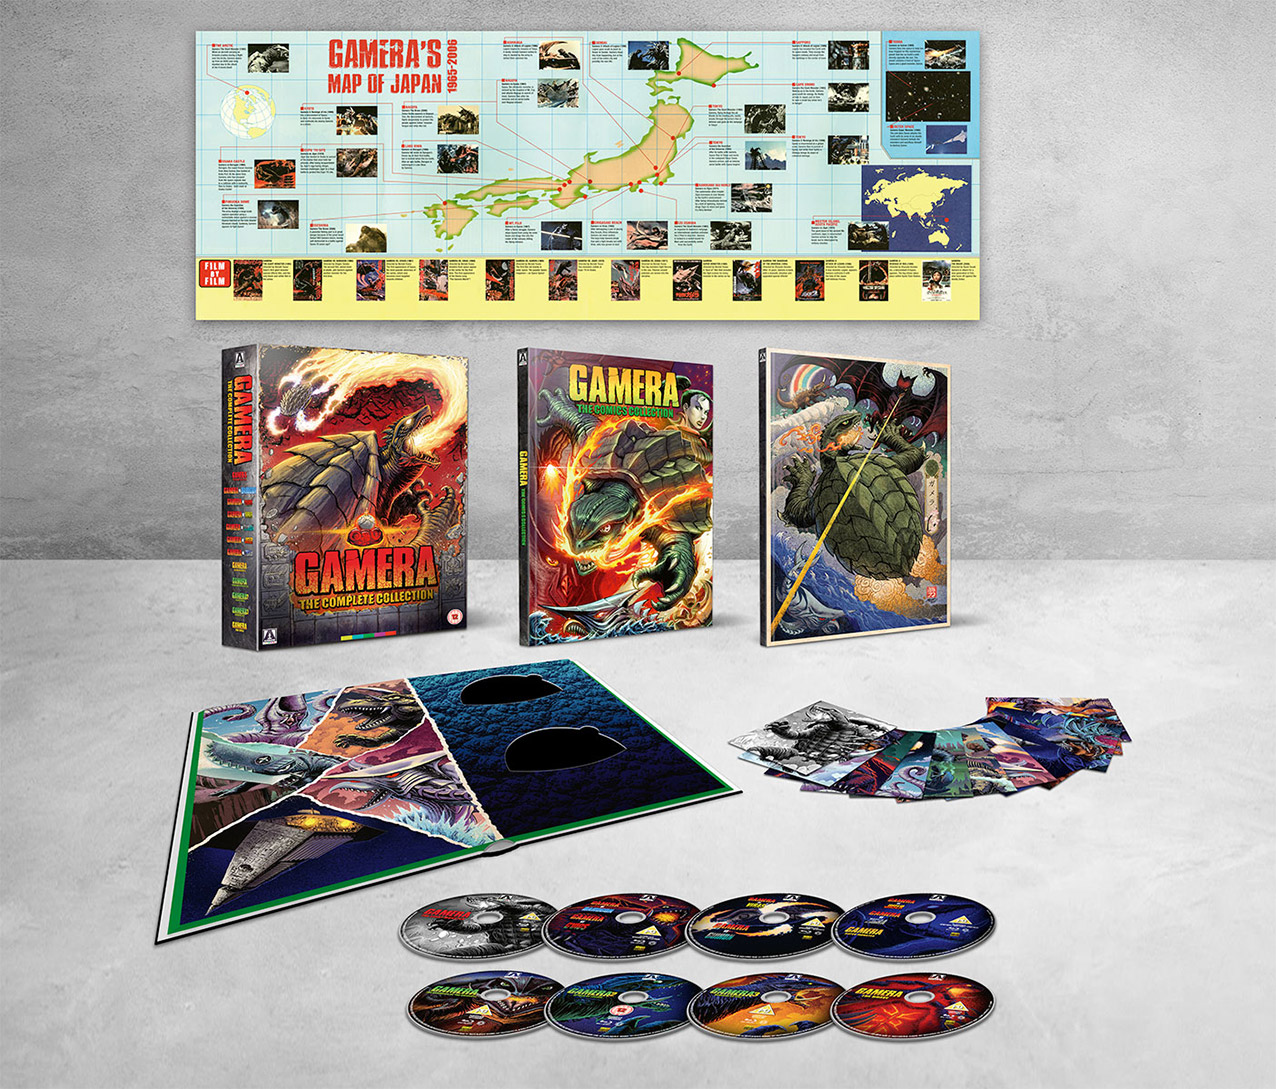 Gamera: The Complete Collection Blu-ray pack shot